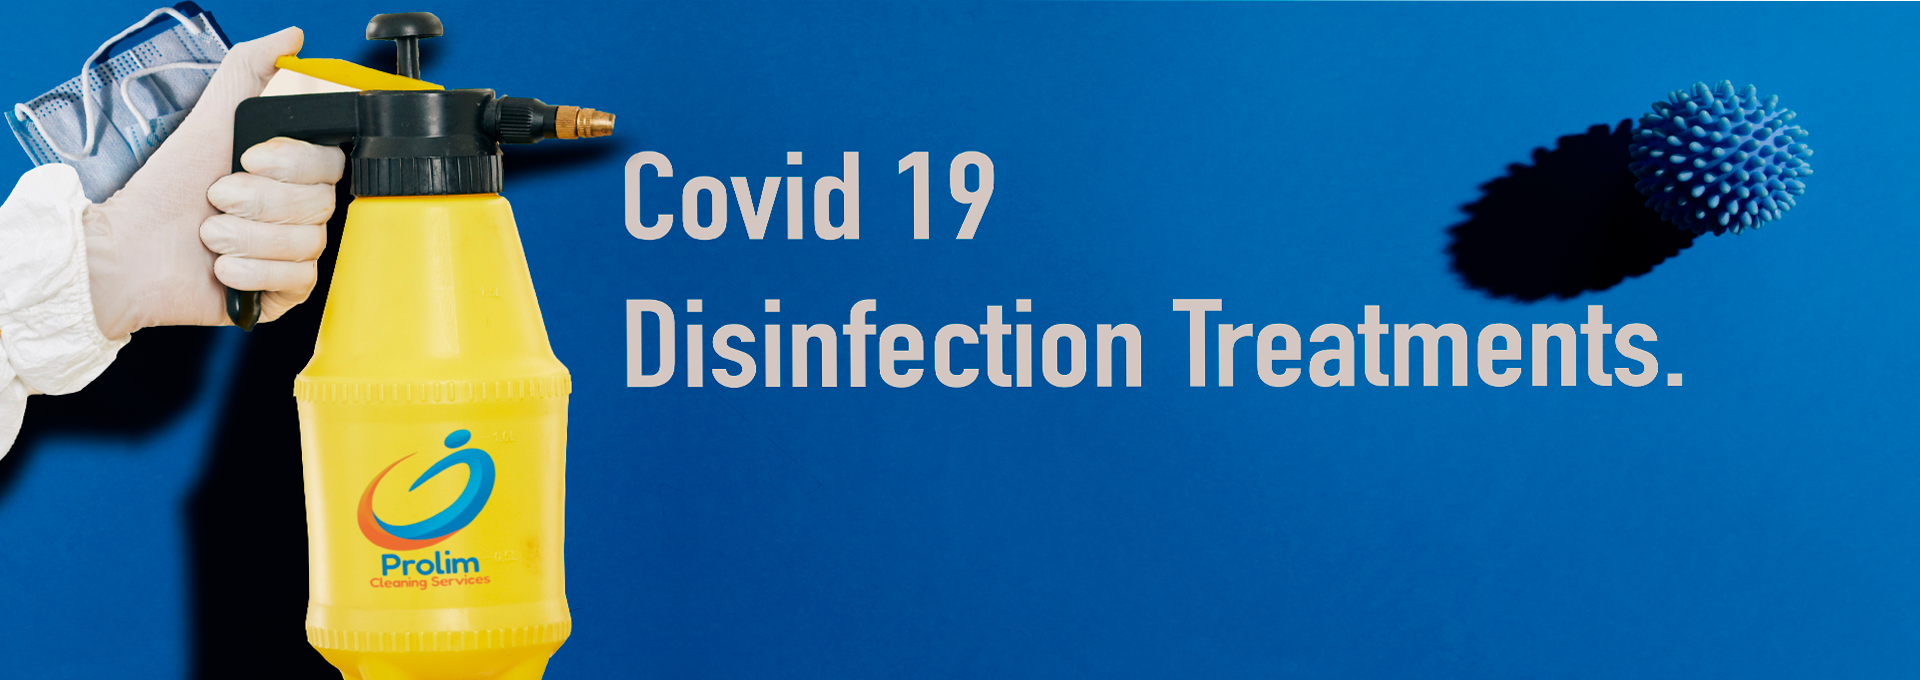 Covid-19 Disinfection London